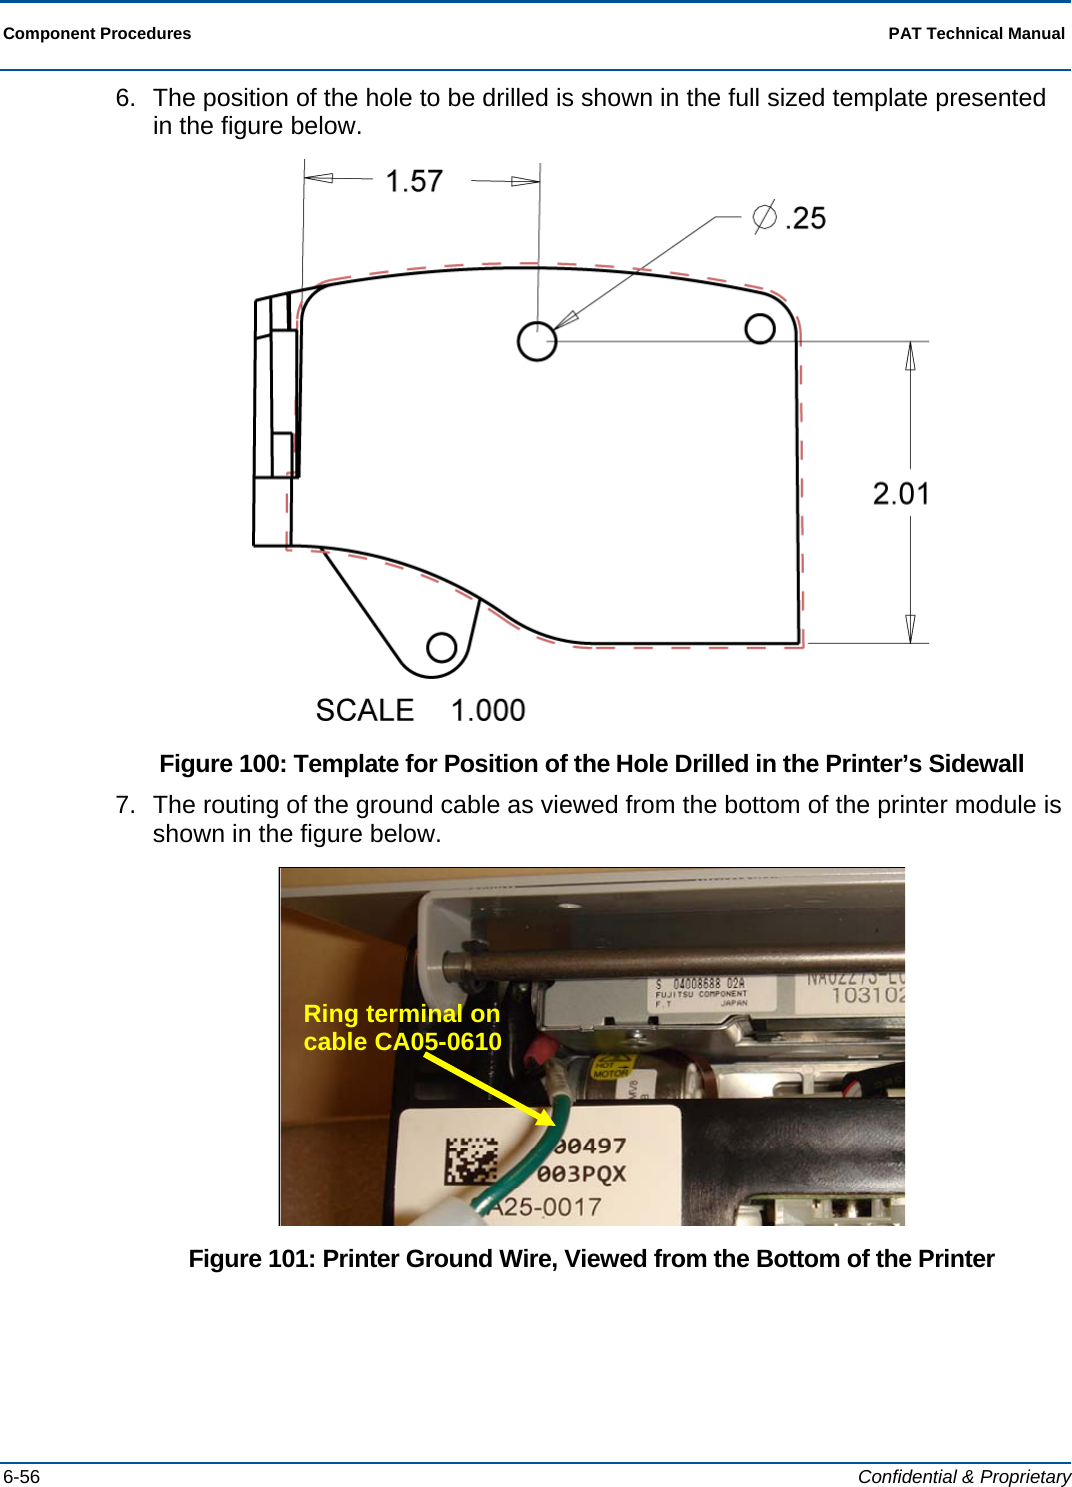  Component Procedures  PAT Technical Manual  6-56  Confidential &amp; Proprietary 6.  The position of the hole to be drilled is shown in the full sized template presented in the figure below.  Figure 100: Template for Position of the Hole Drilled in the Printer’s Sidewall 7.  The routing of the ground cable as viewed from the bottom of the printer module is shown in the figure below.  Figure 101: Printer Ground Wire, Viewed from the Bottom of the Printer Ring terminal on cable CA05-0610 